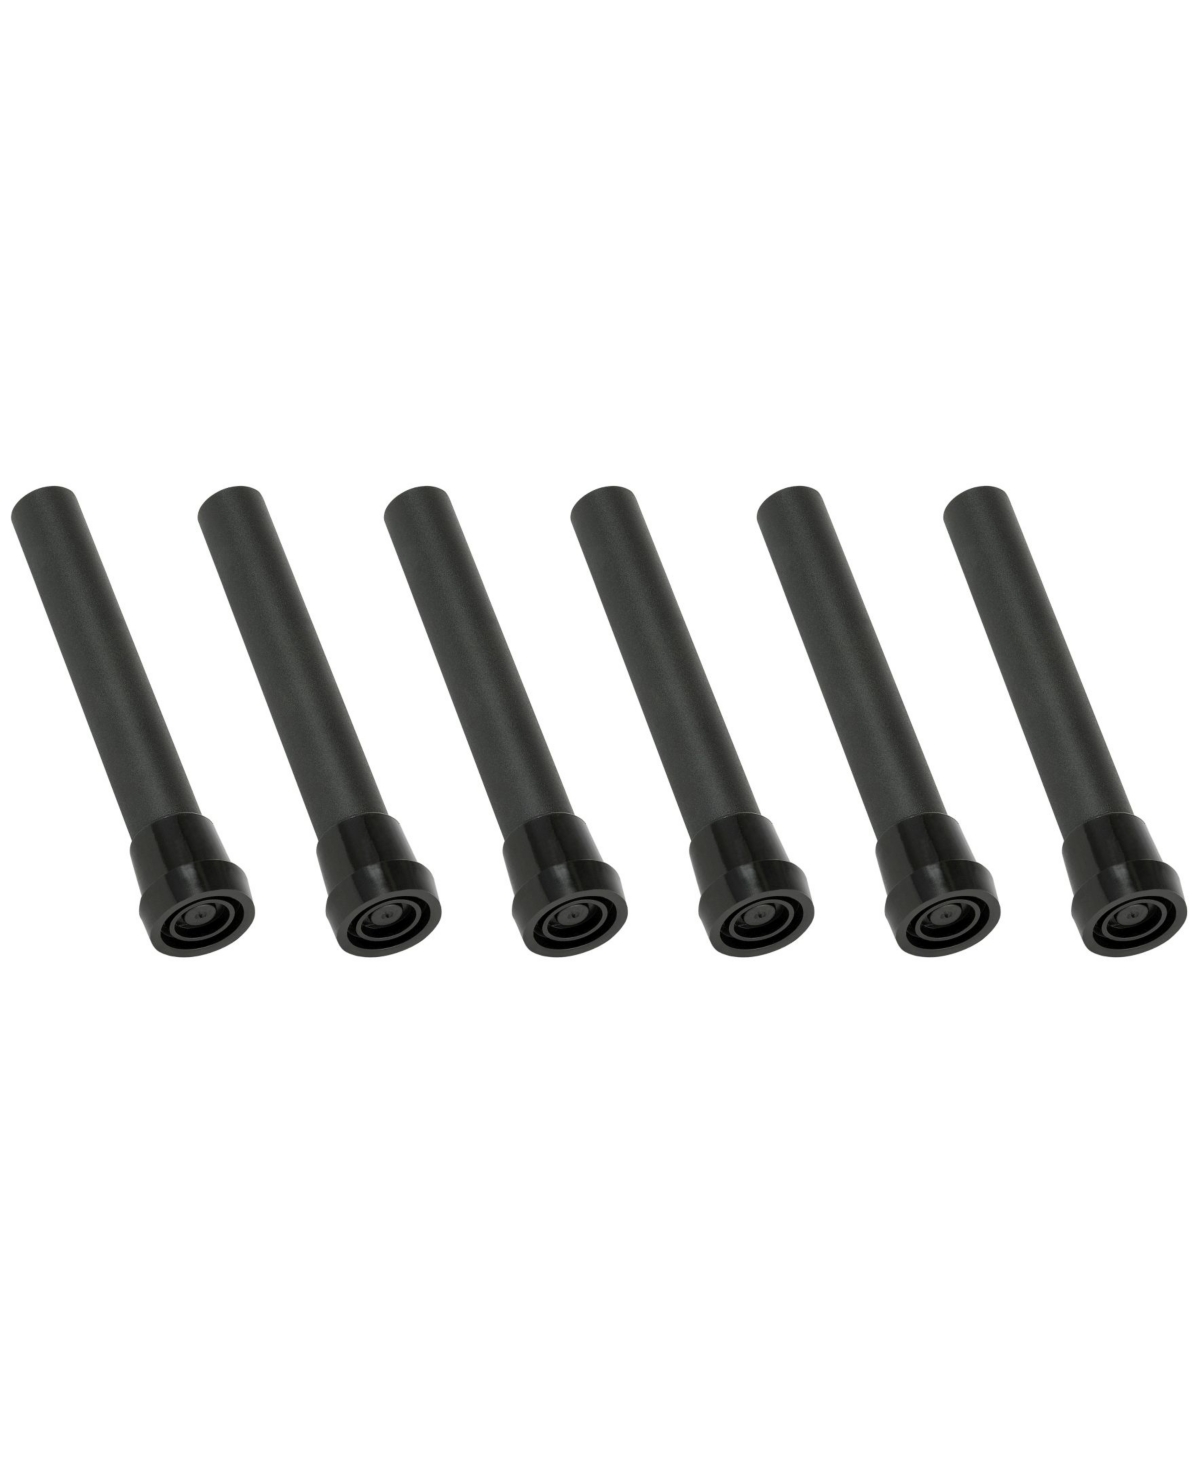 UPC 714757400326 product image for Upperbounce Universal Replacement Legs for Mini Trampolines and Rebounders, Set  | upcitemdb.com